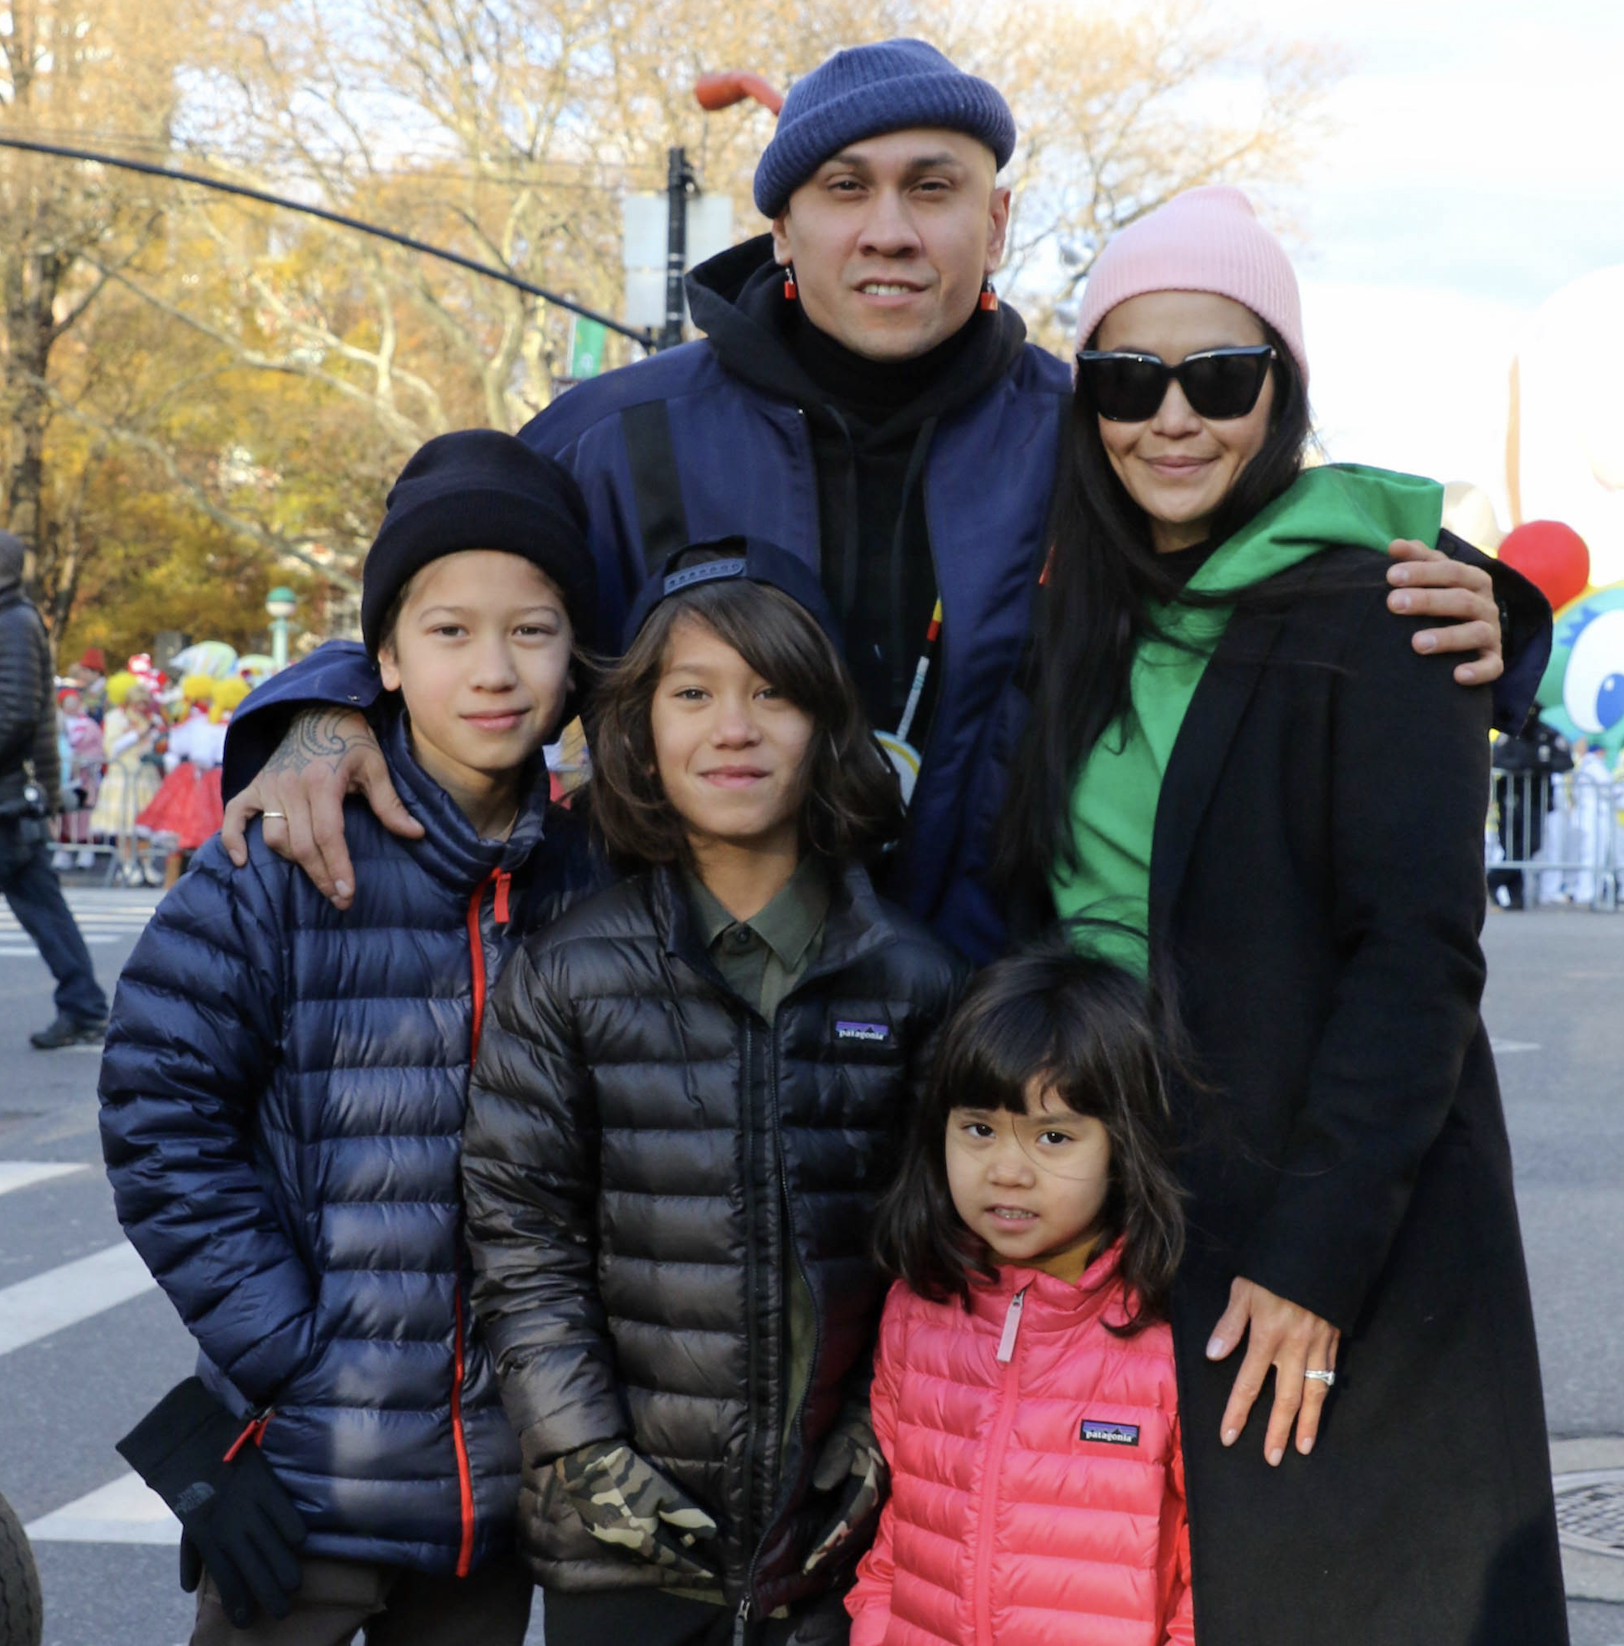 Taboo and his wife, Jaymie Dizon with their children Jimmy, Journey, and Jett at the Macy's Thanksgiving Day Parade in 2019